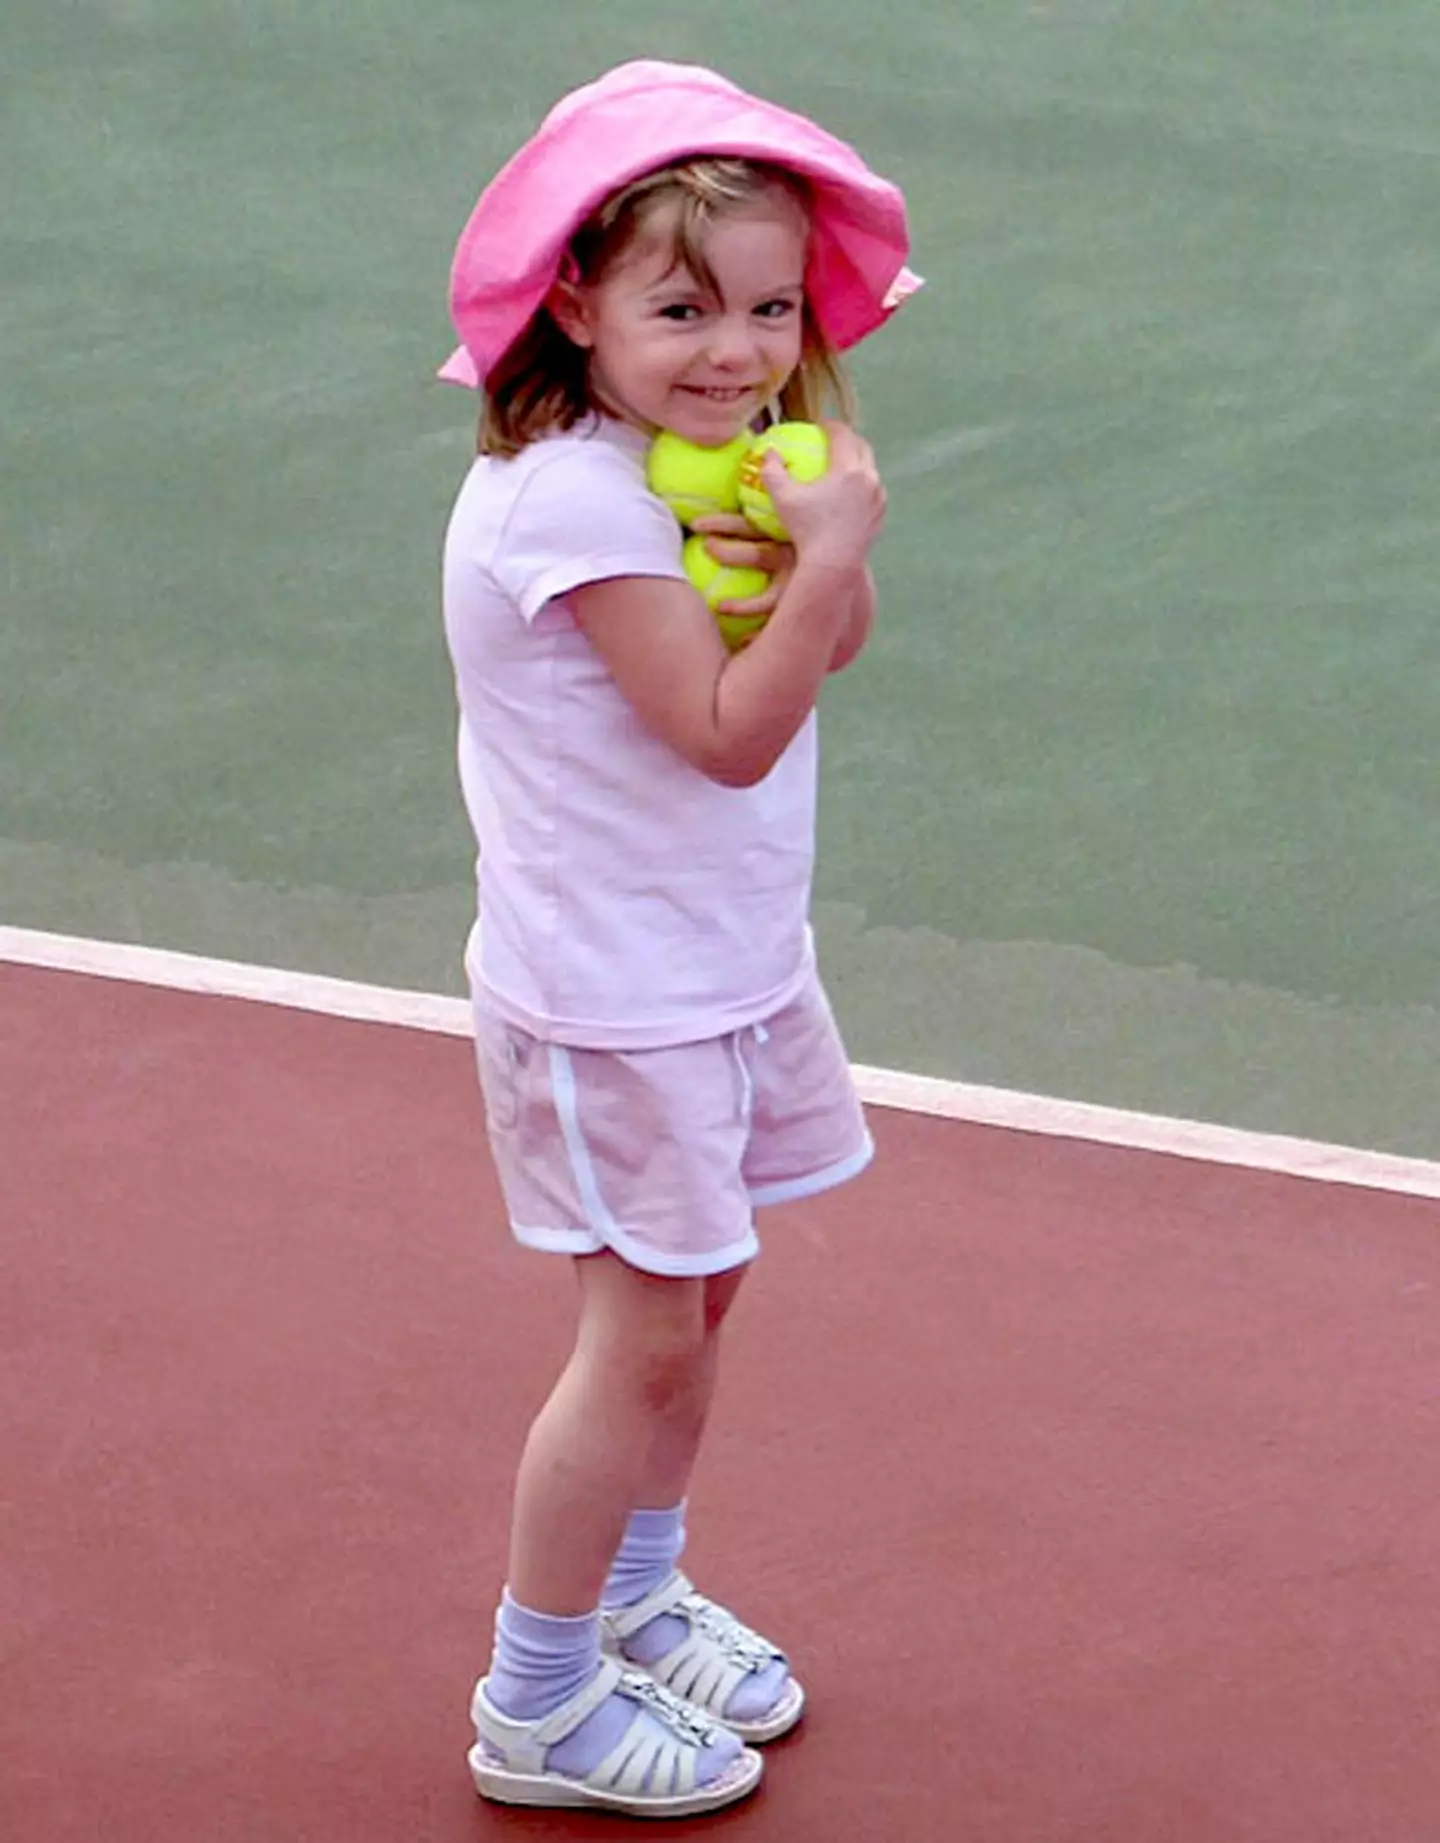 Madeleine McCann has been missing since 3 May 2007.